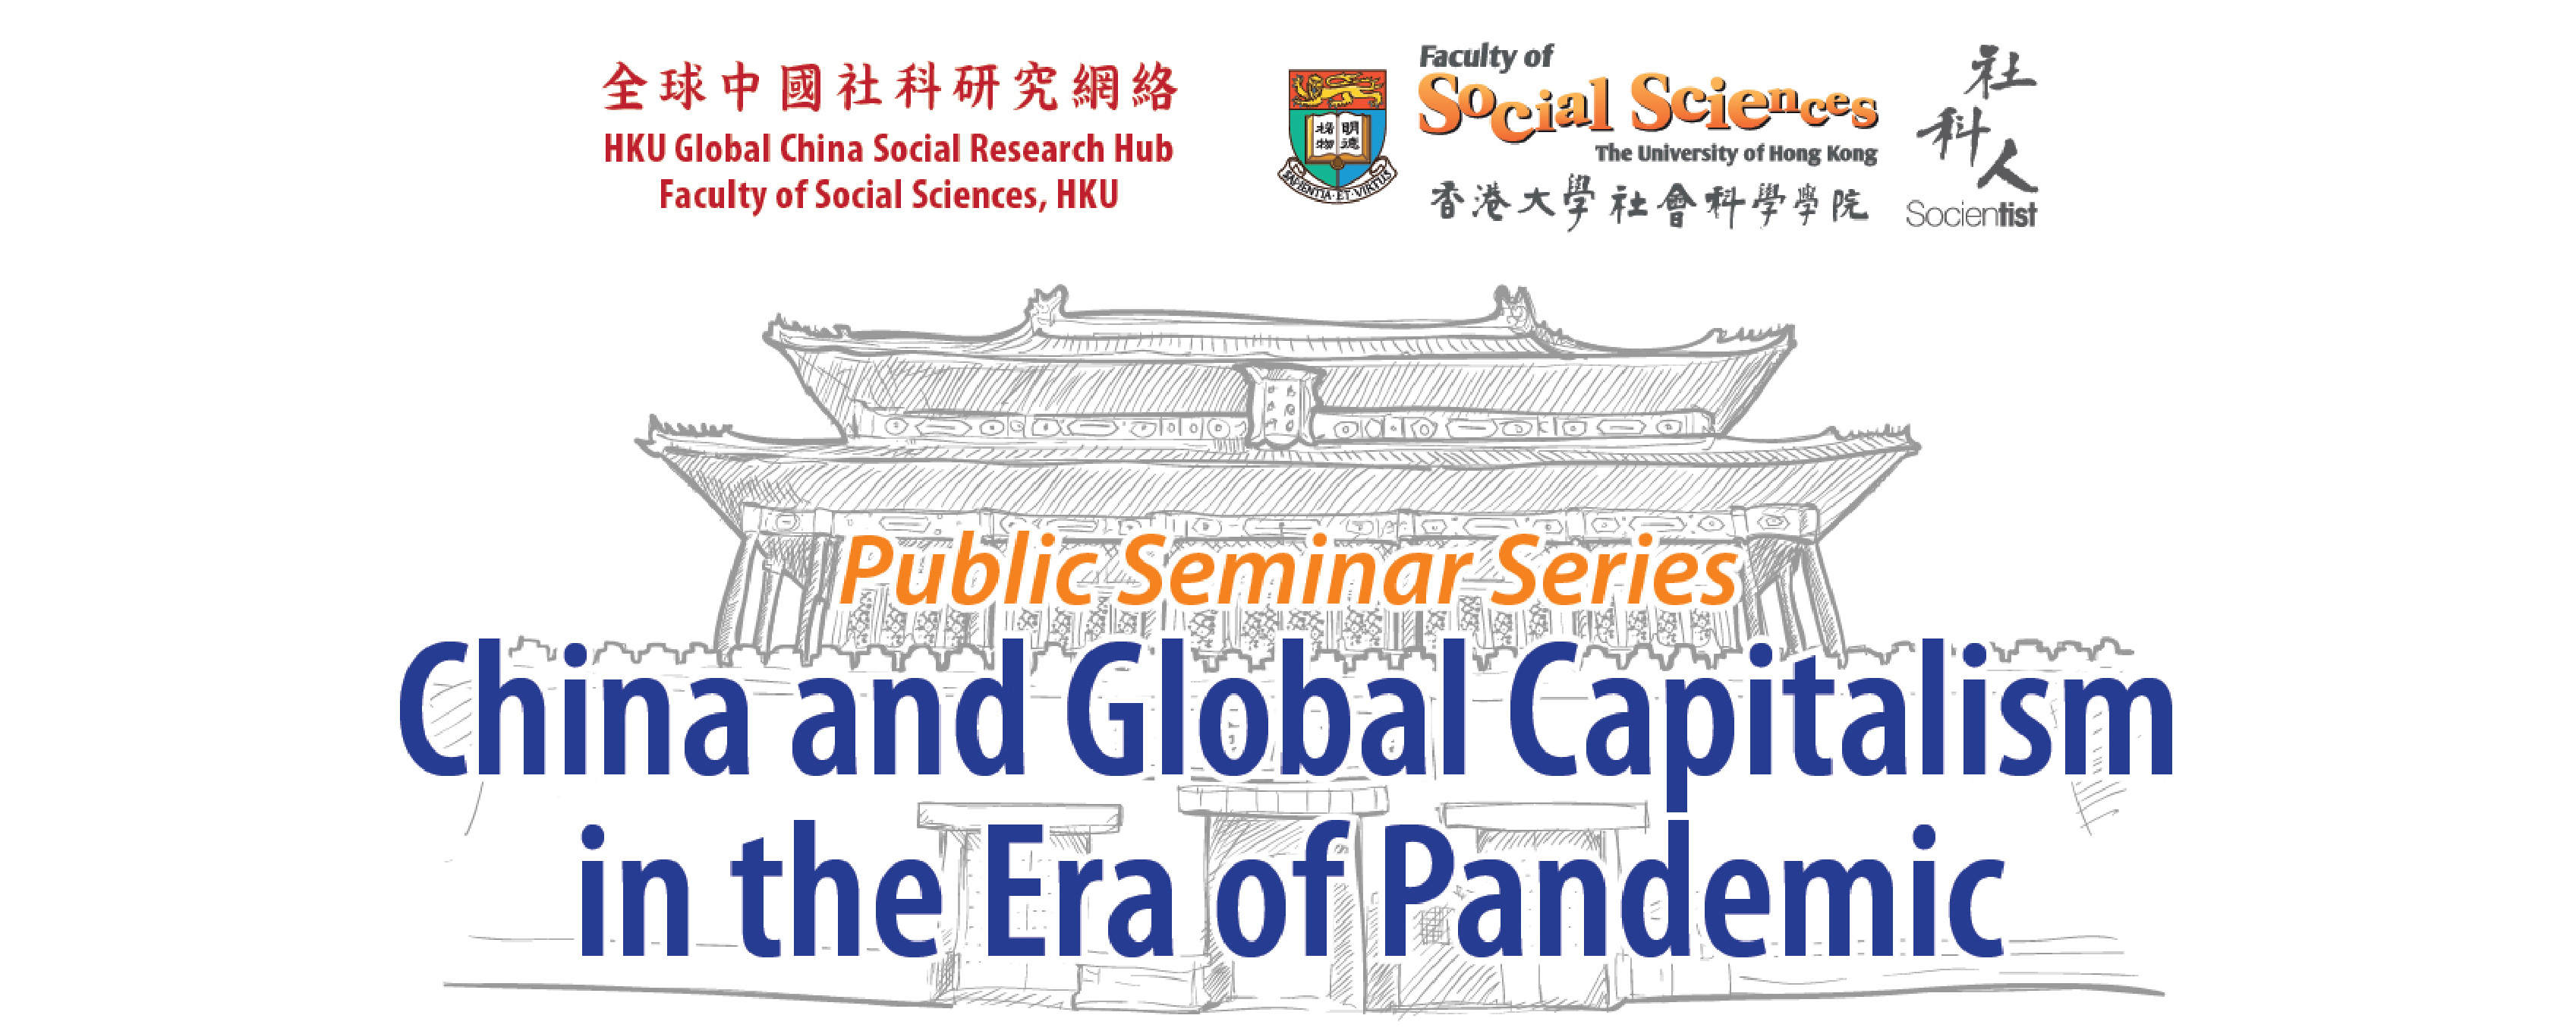 China and global capitalism in the Era of Pandemic